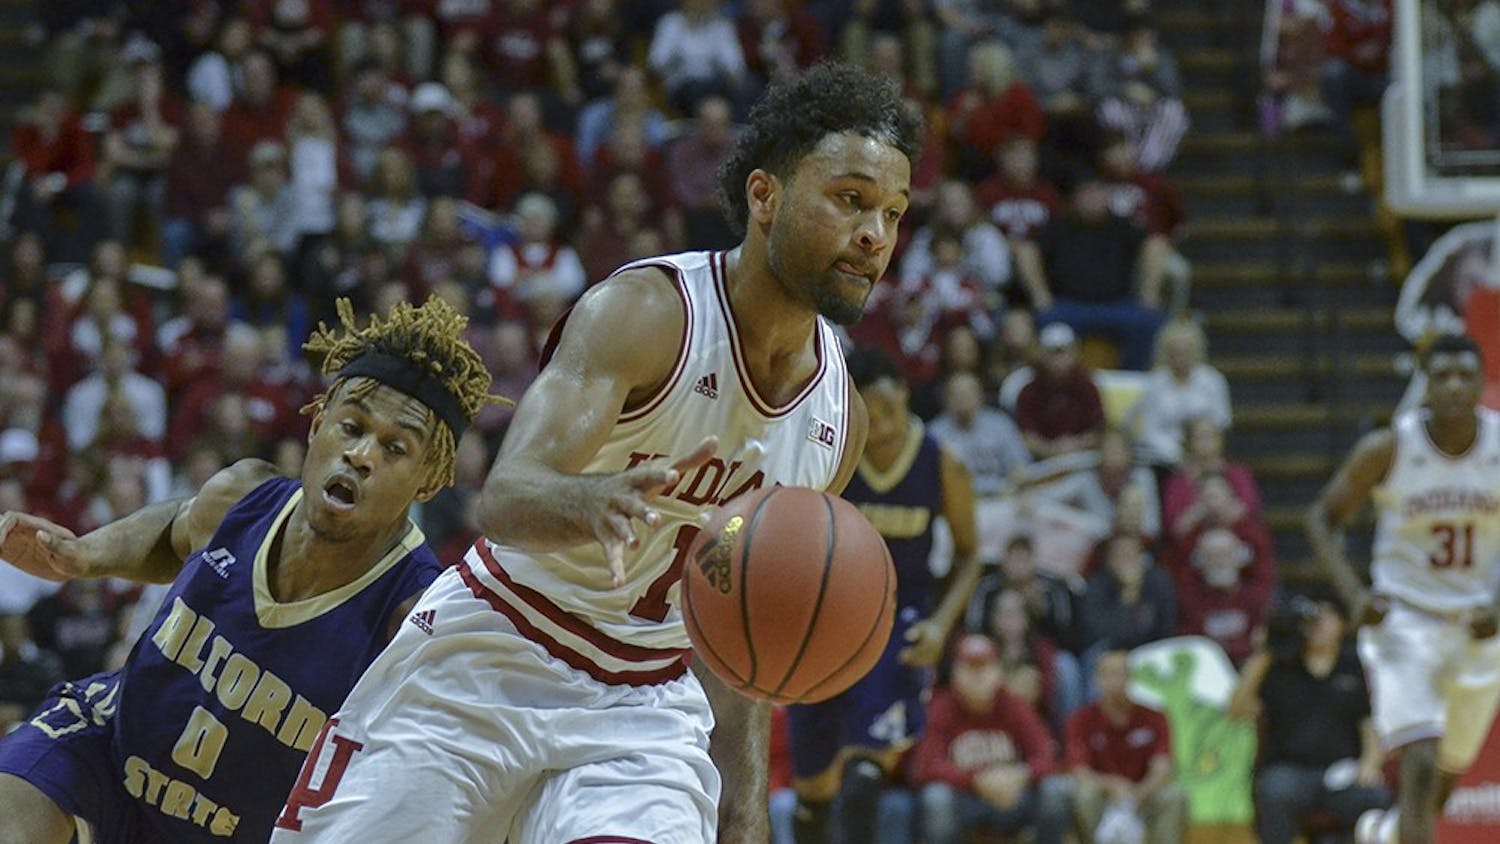 Sophomore guard James Blackmon Jr. trips up his Alcorn State defender as he drives for layup Monday at Assembly Hall. The Hoosiers won 112-70.